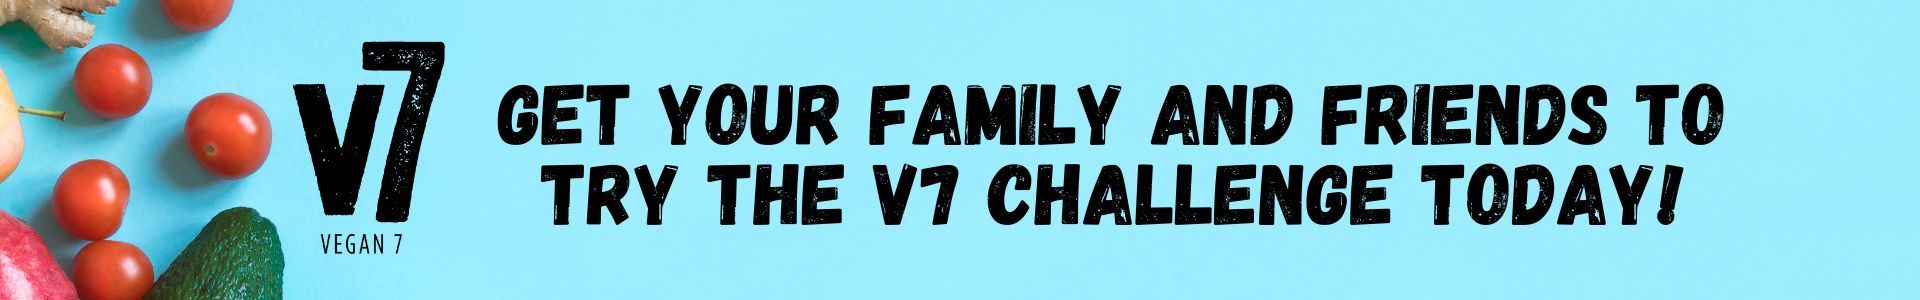 get your family and friends to try the v7 challenge today!